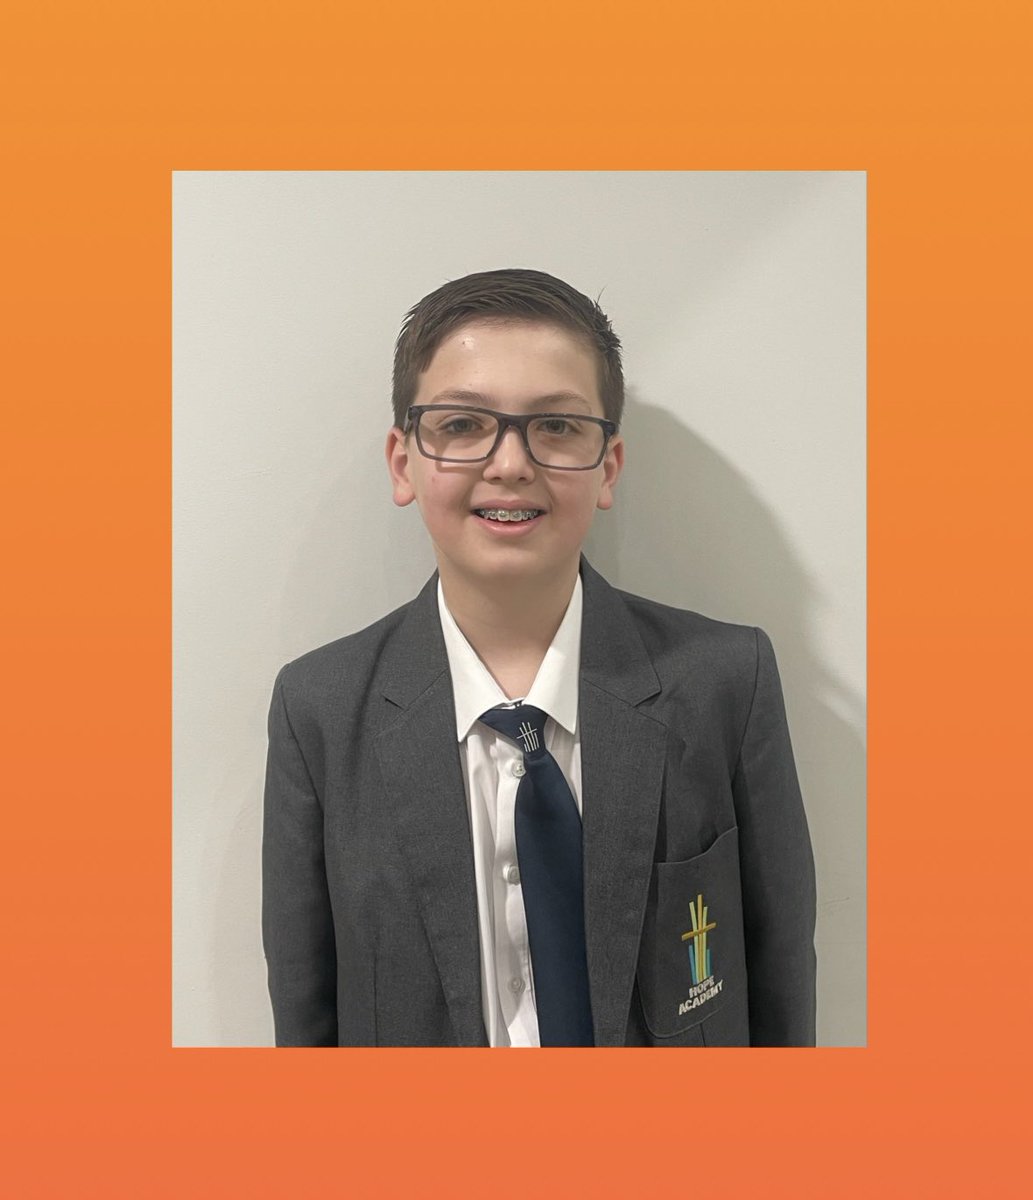 Huge well done to Sam B for receiving his Platinum Award. Well done, Sam. What an incredible achievement 🧡🧡

@Hope_Academy